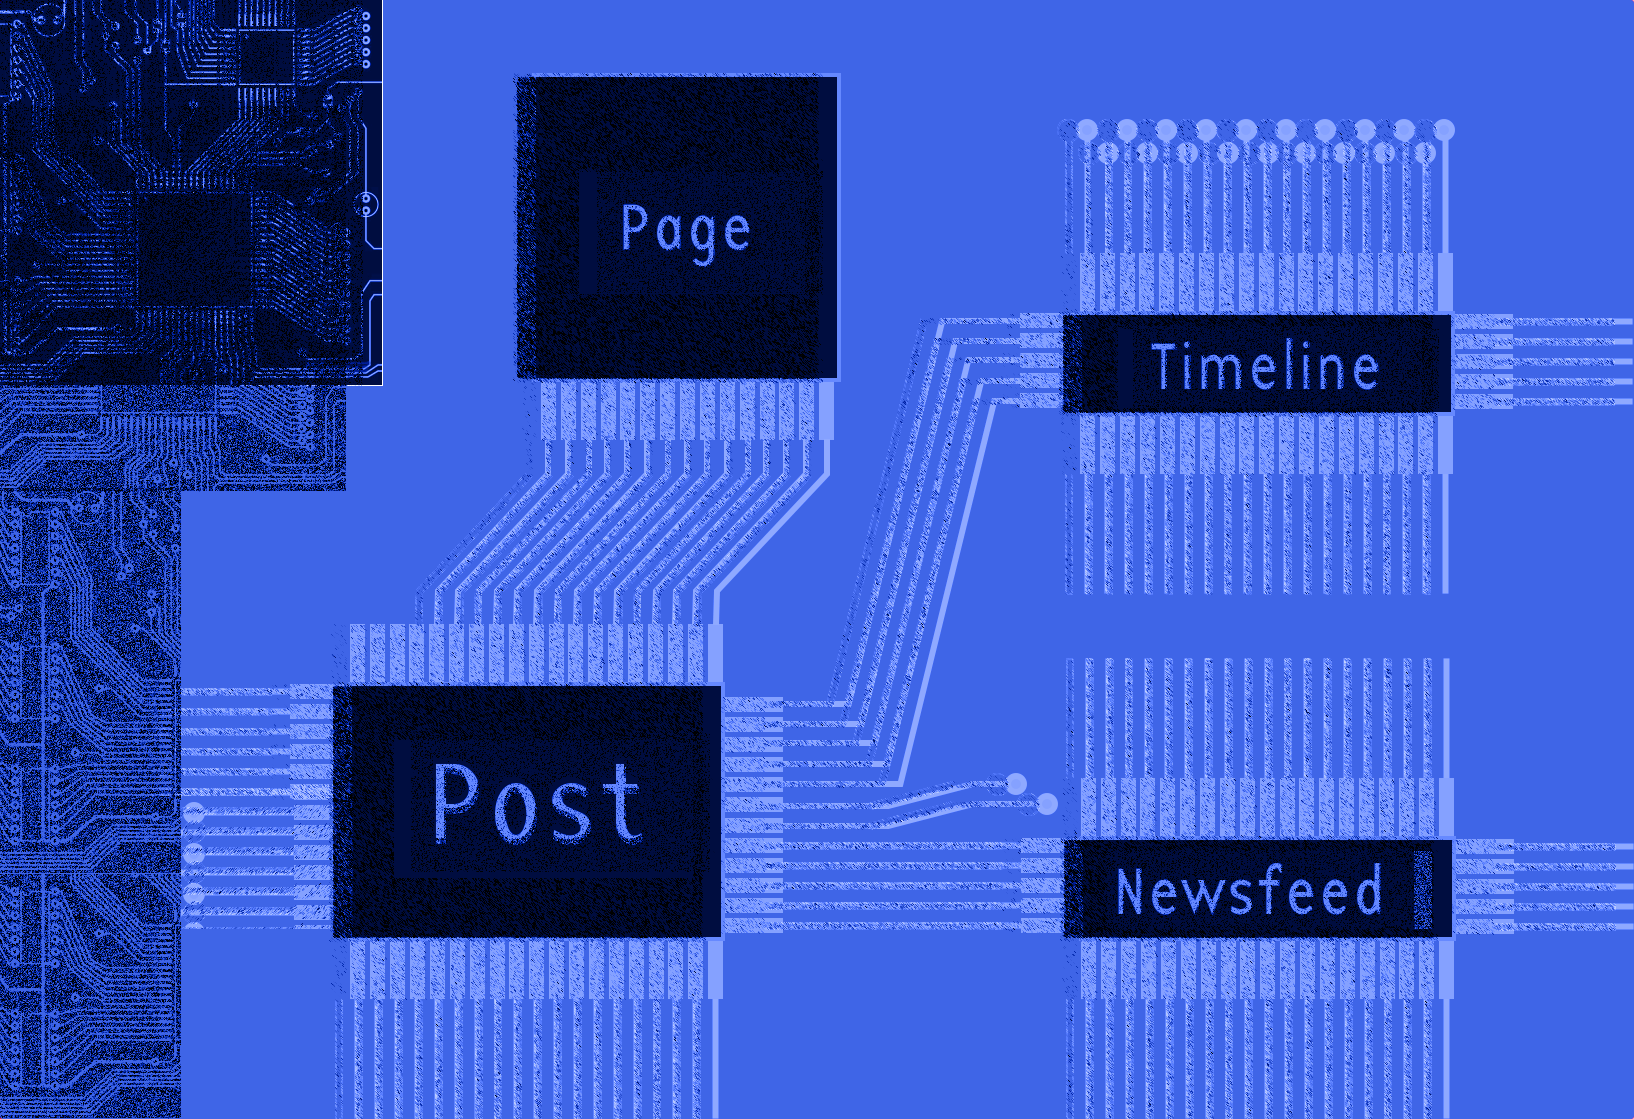 The product architecture of the post